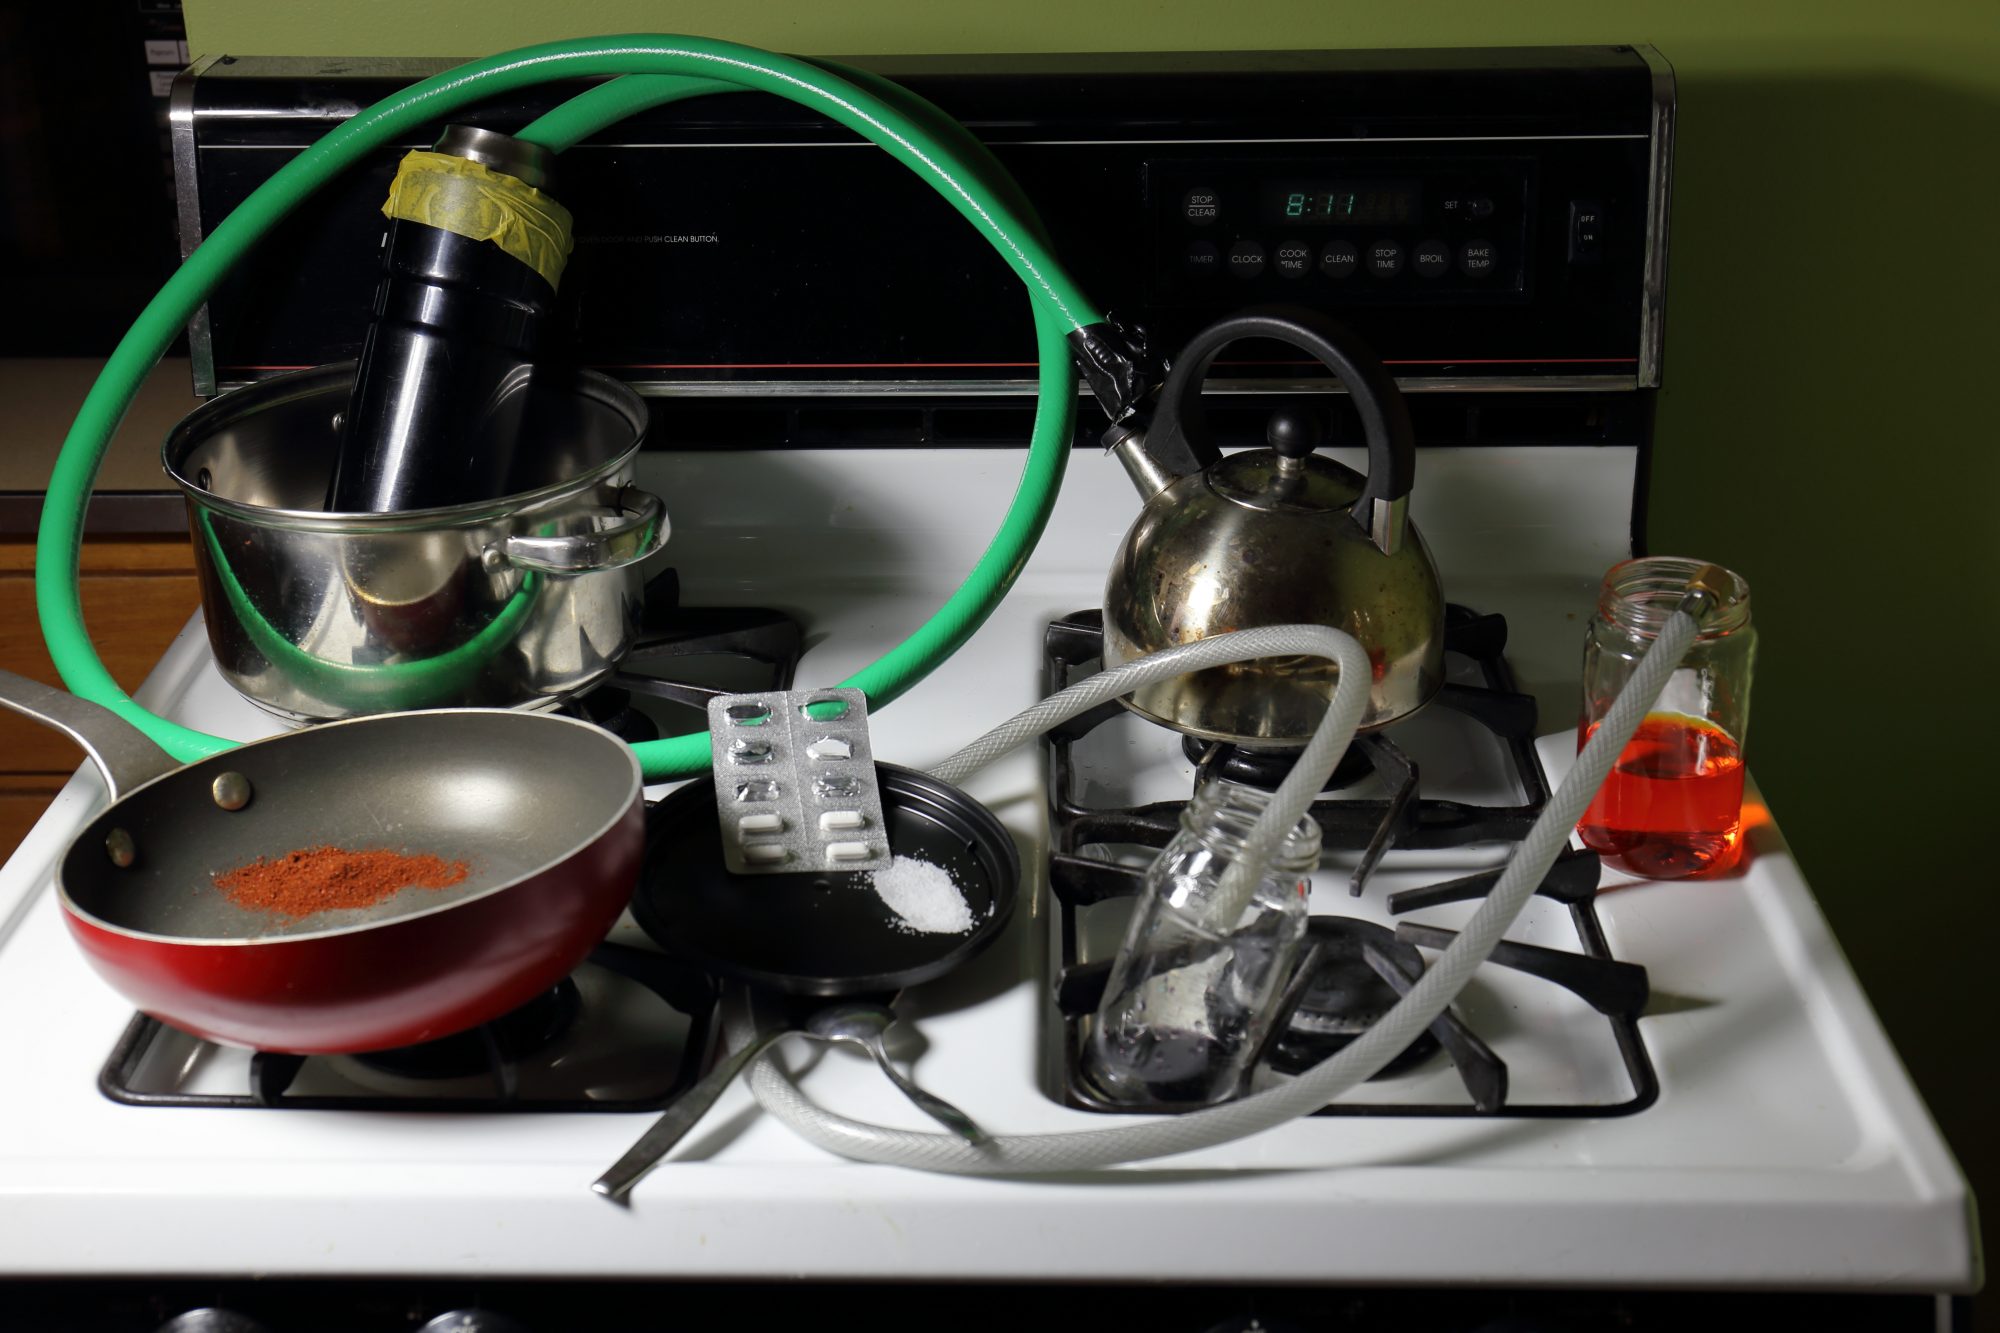 Crudely constructed meth lab on a stove top consisting of crushed nasal decongestant pills, solutions, a red powder, pots and pans, and hoses